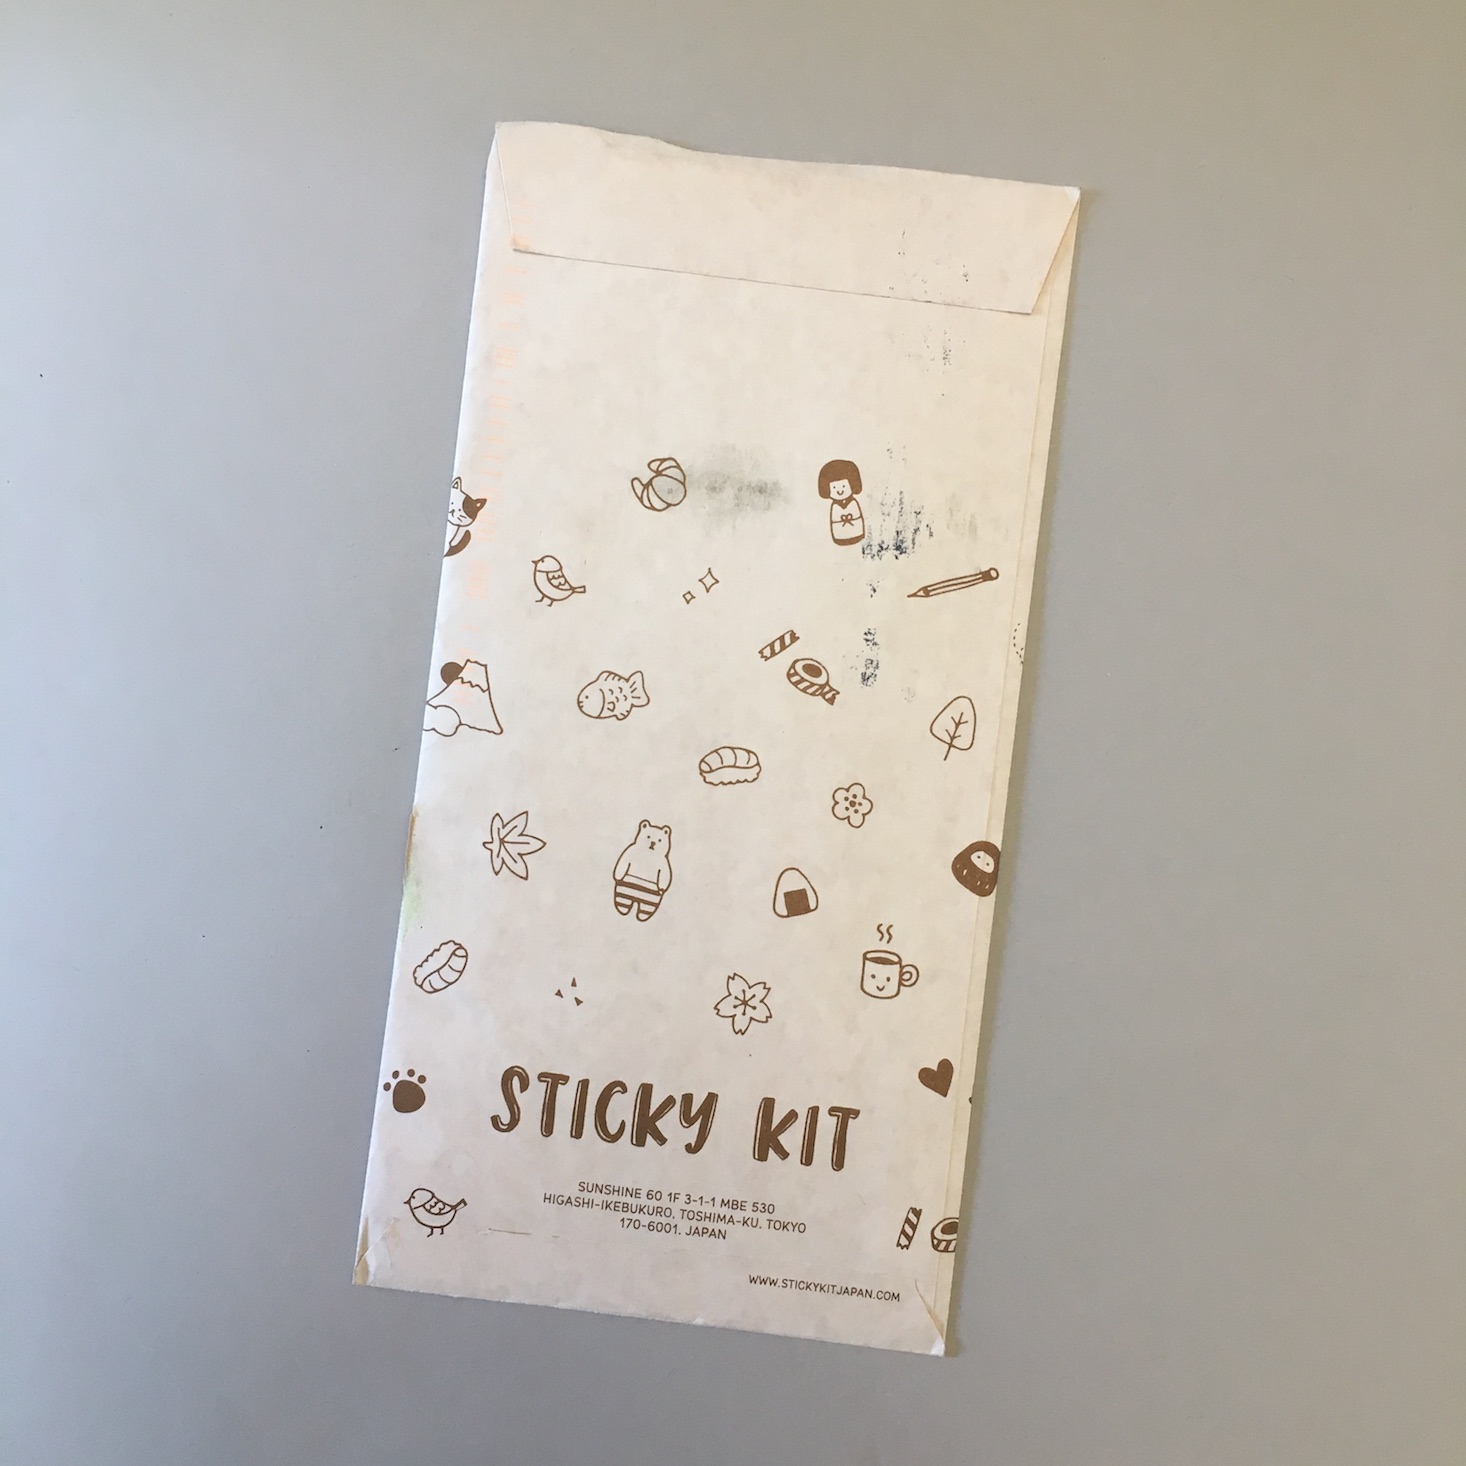 Sticky Kit Sticker Subscription Review + Coupon – April 2018